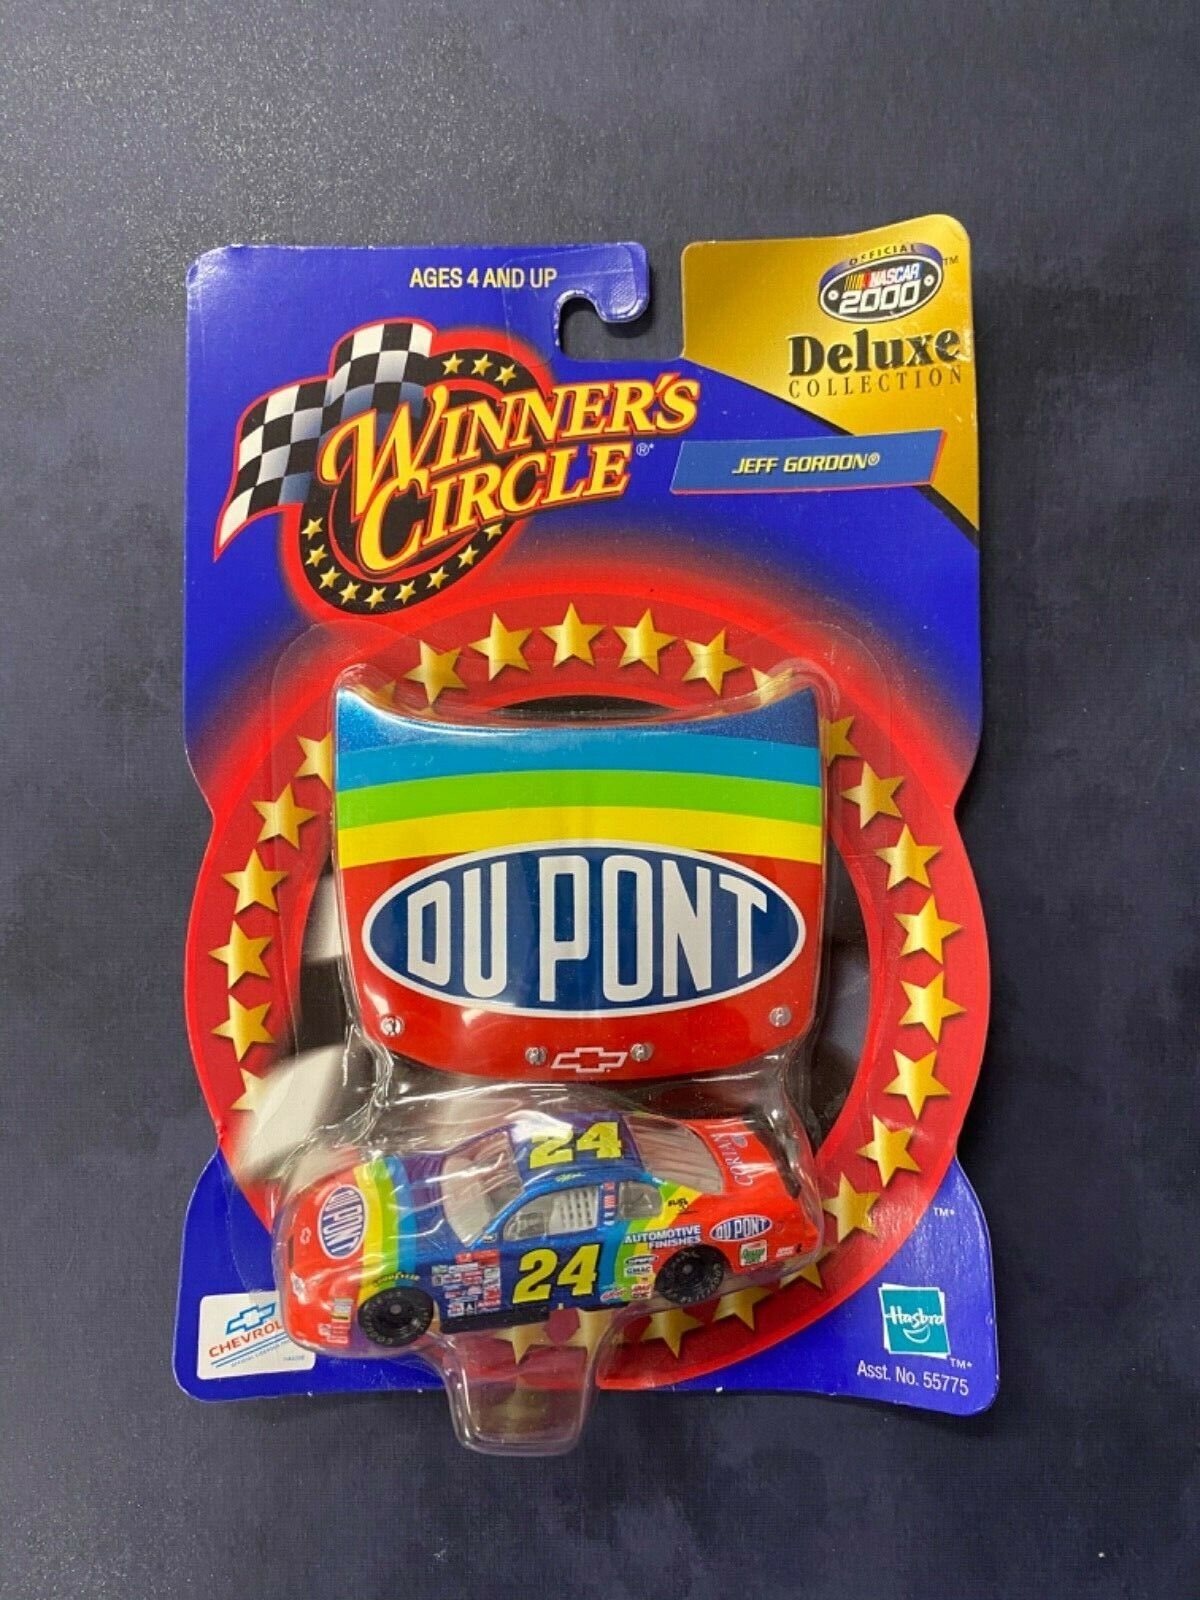 Jeff Gordon Winners Circle Deluxe Condition DuPont Chevrolet 24